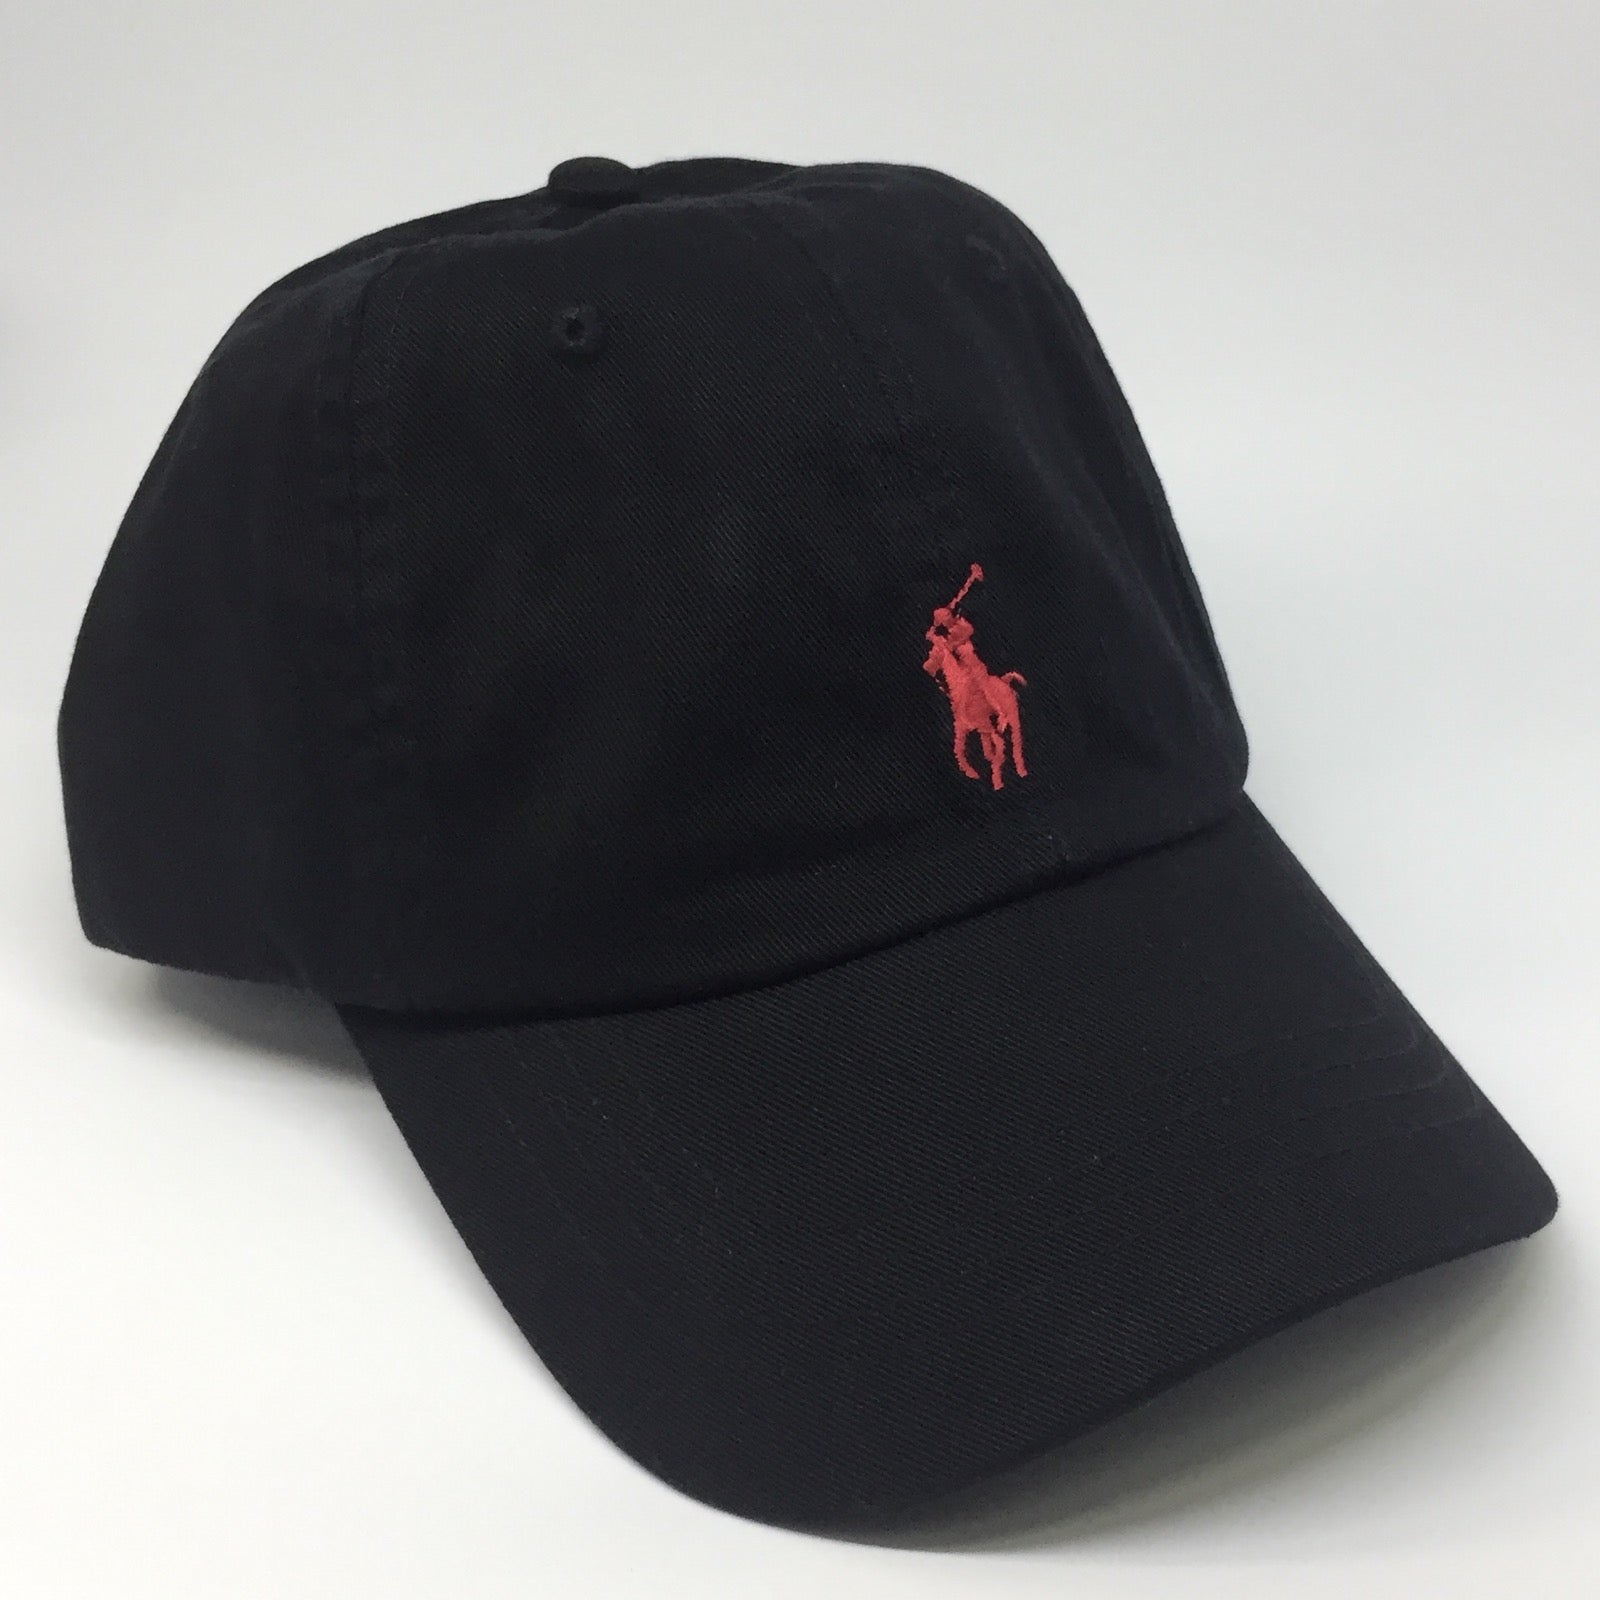 black and red polo hat